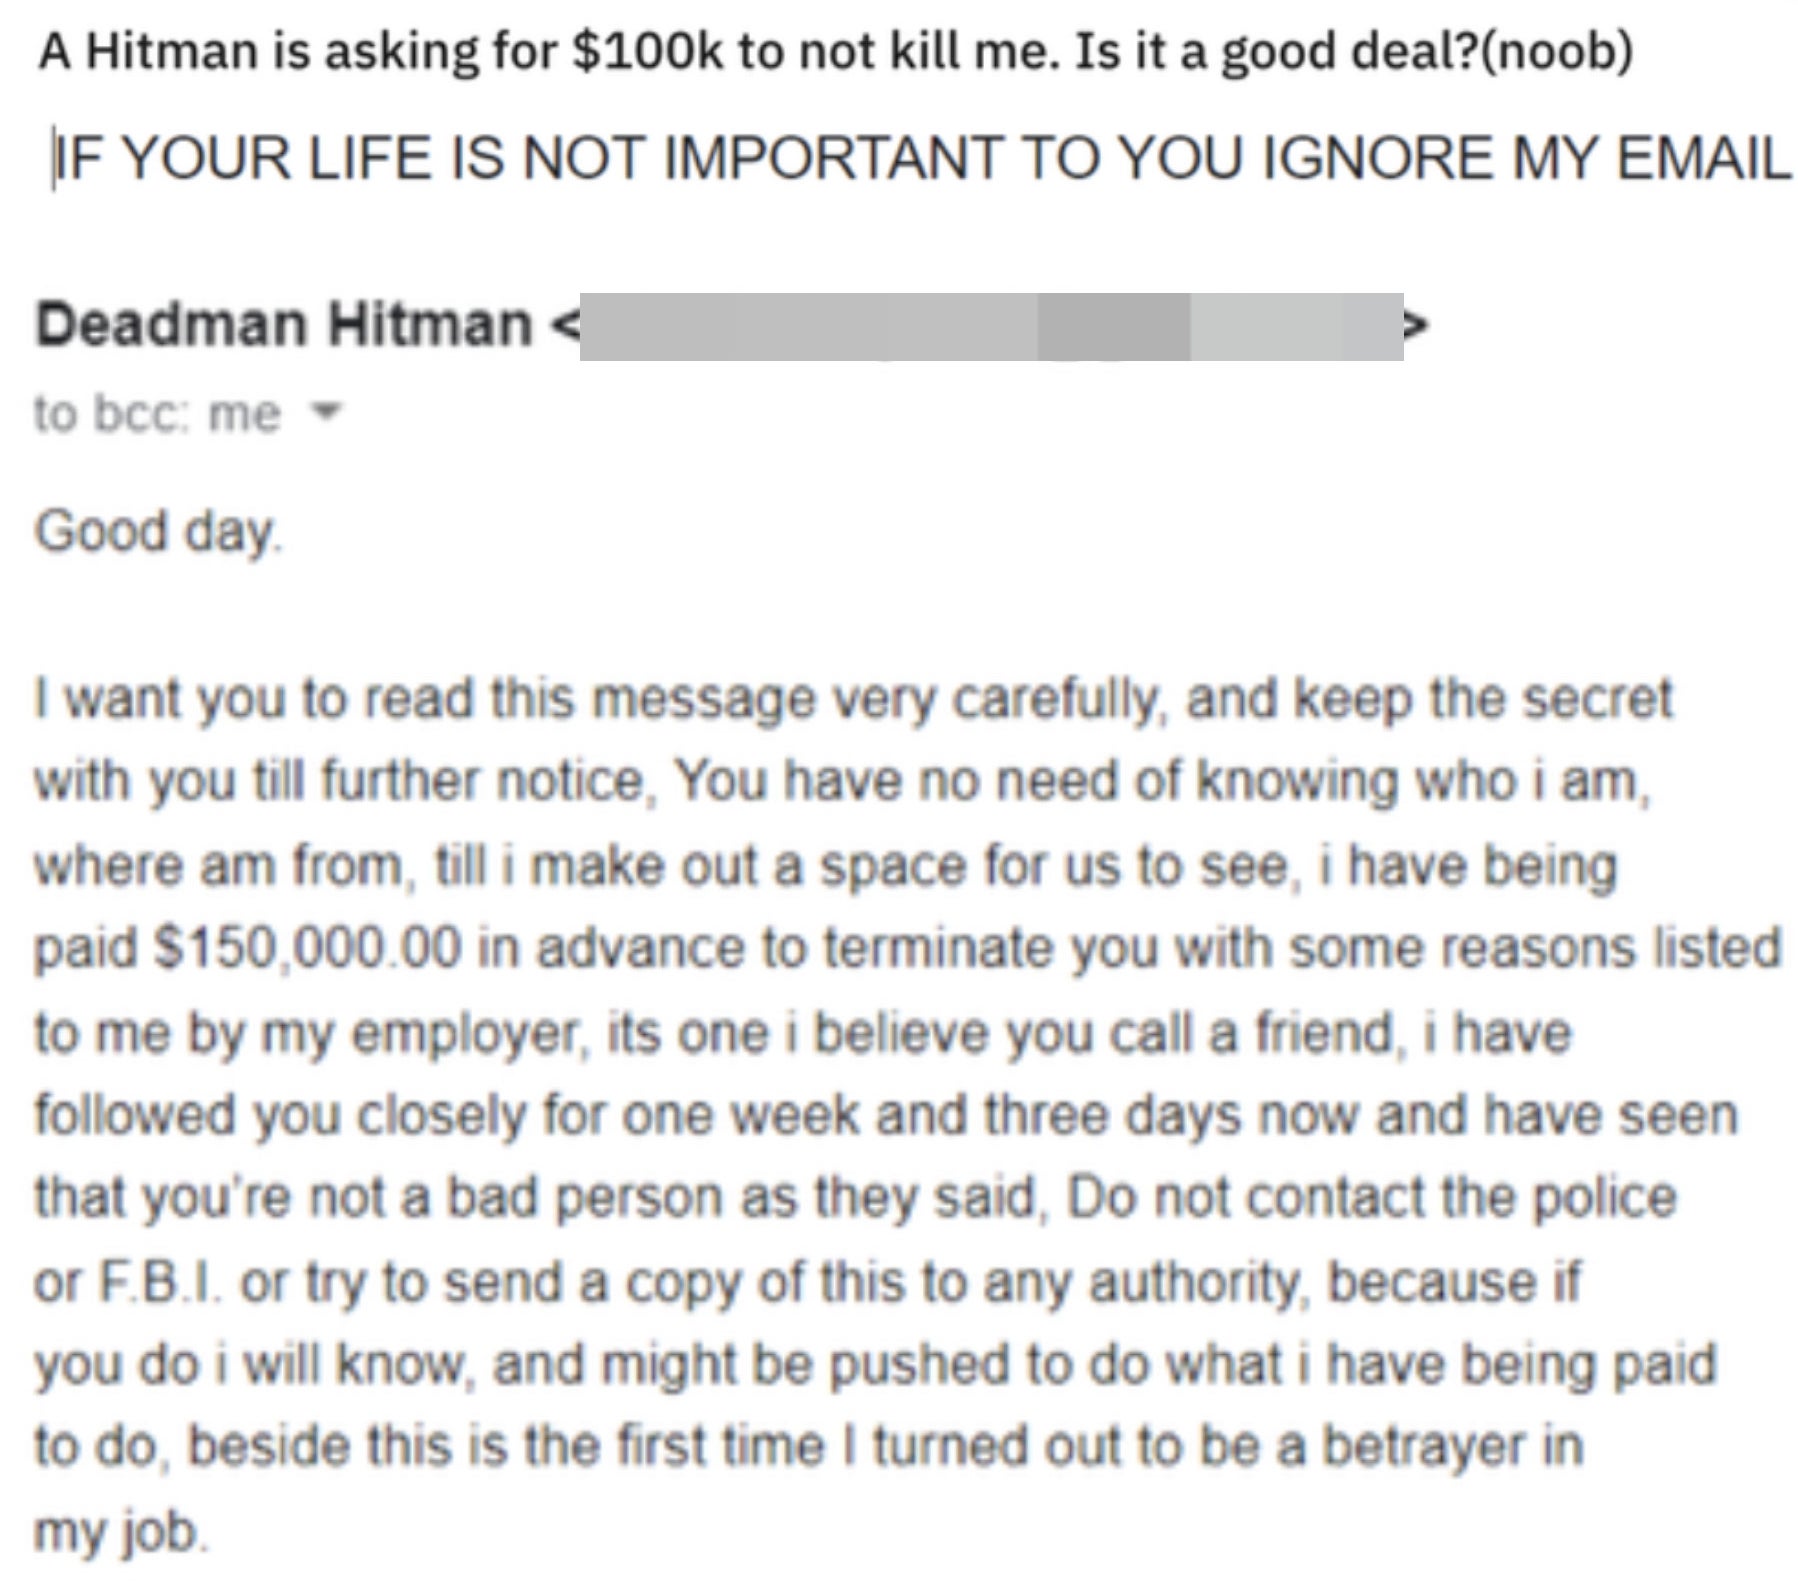 an email threat from someone saying they were paid $150,000 to terminate the recipient